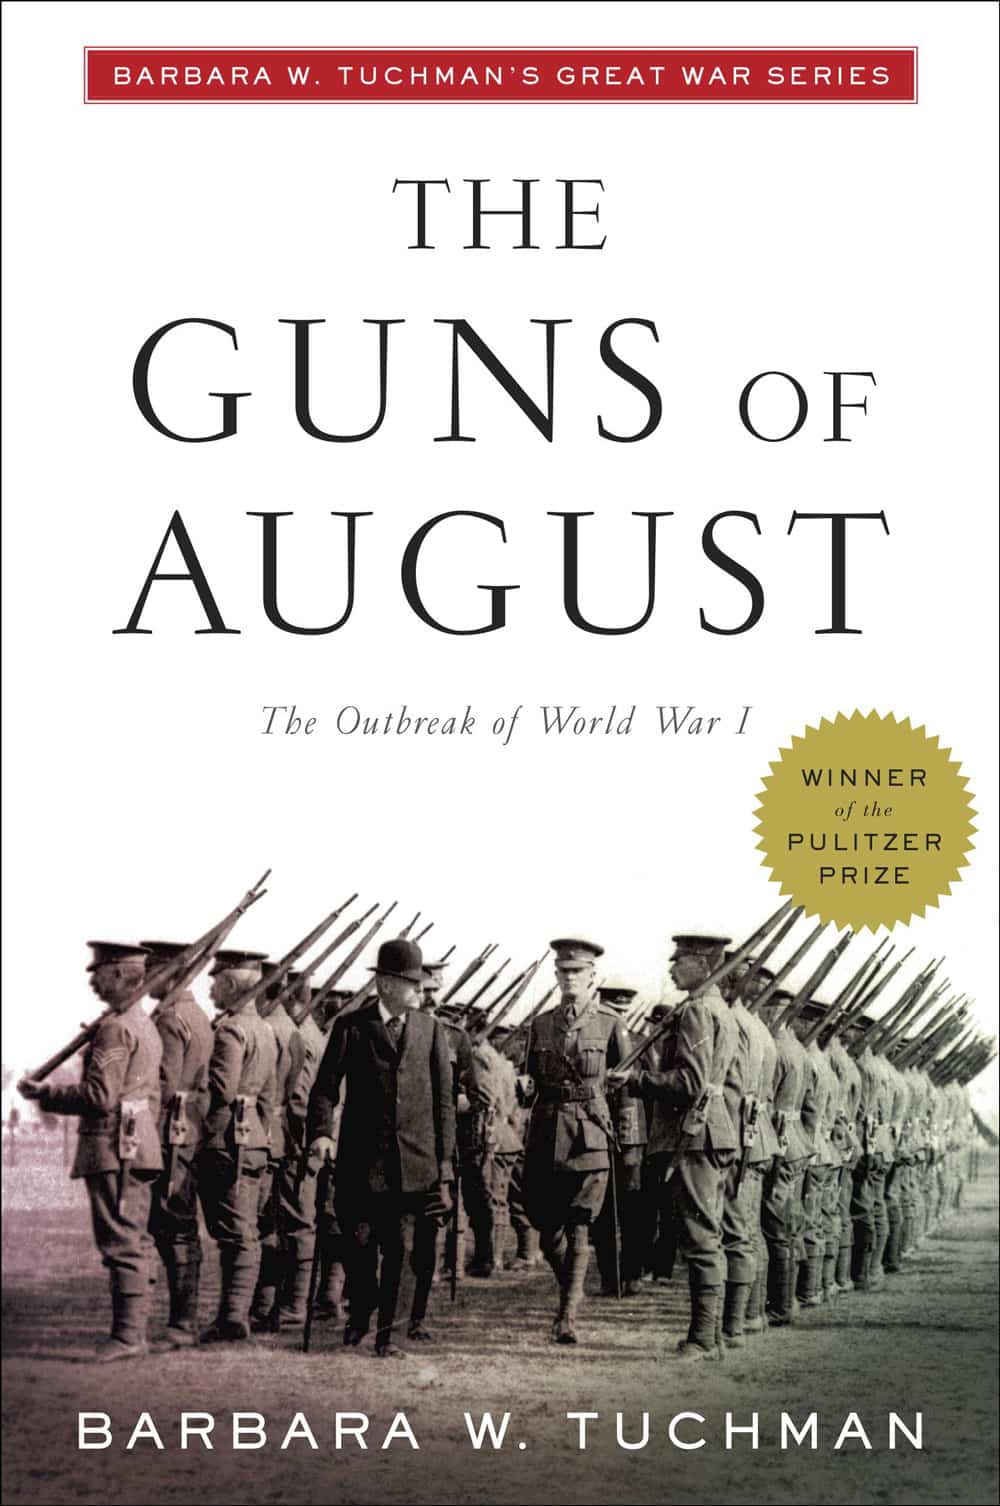 The cover of The Guns of August